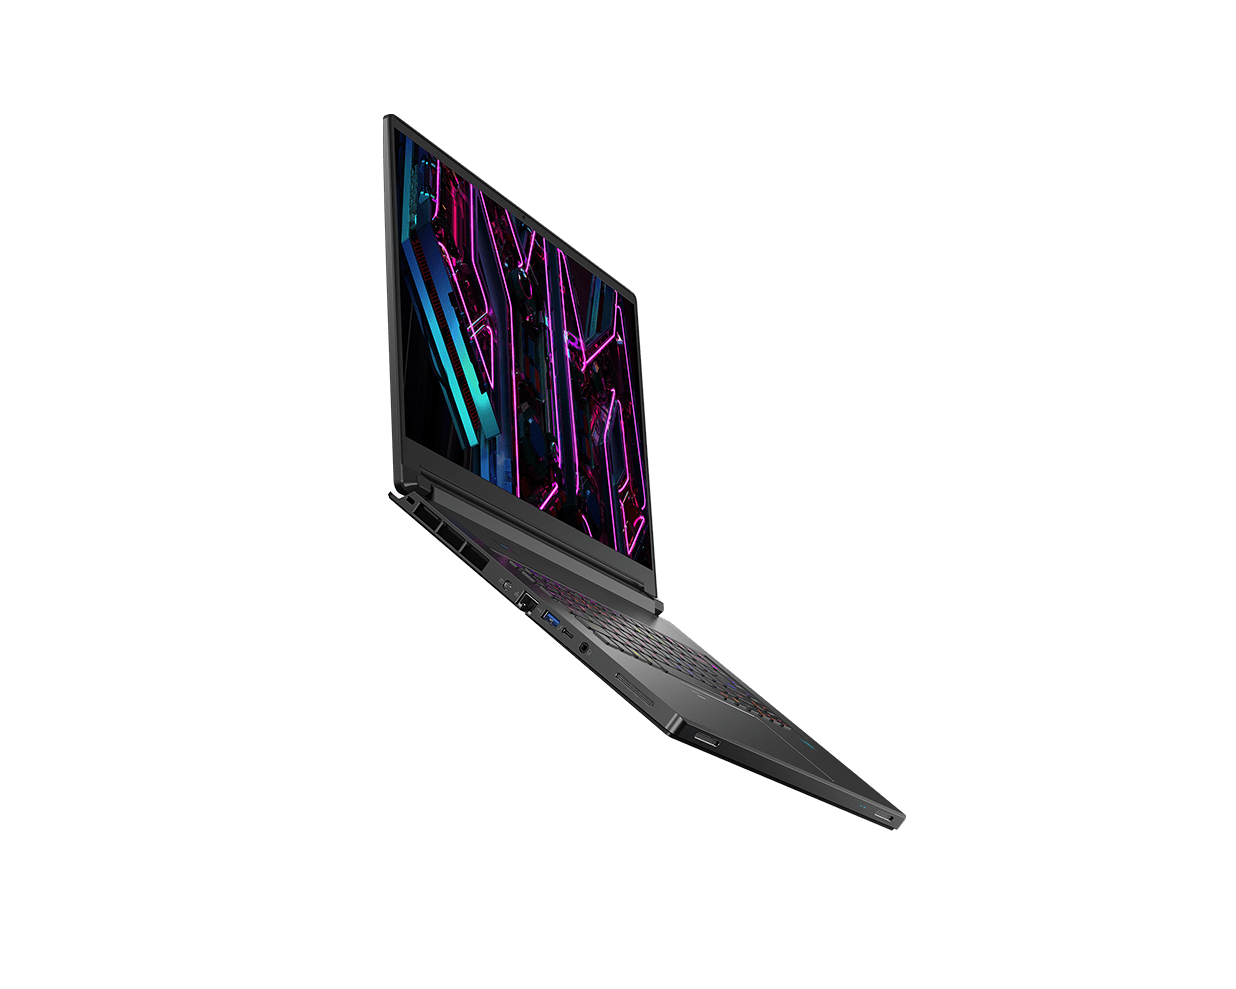 Acer introduces the new Predator Triton 17 X and Predator Helios Neo 16 high-performance gaming laptops